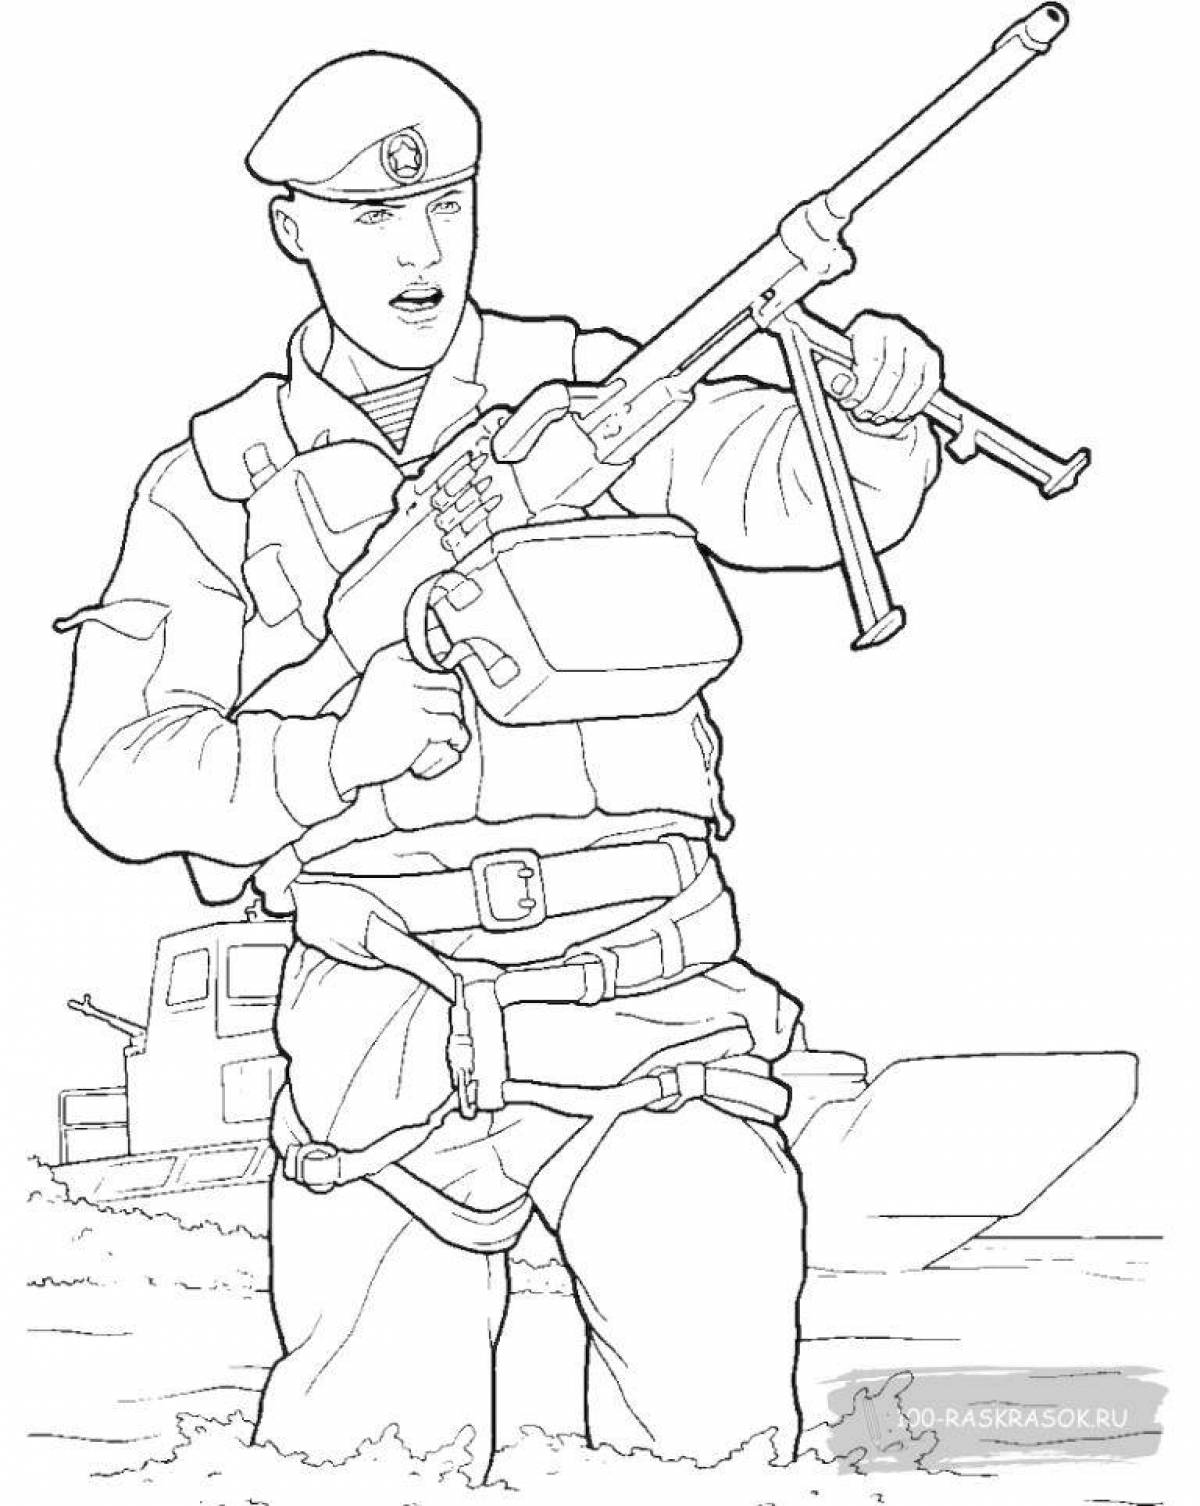 Amazing special forces coloring pages for kids